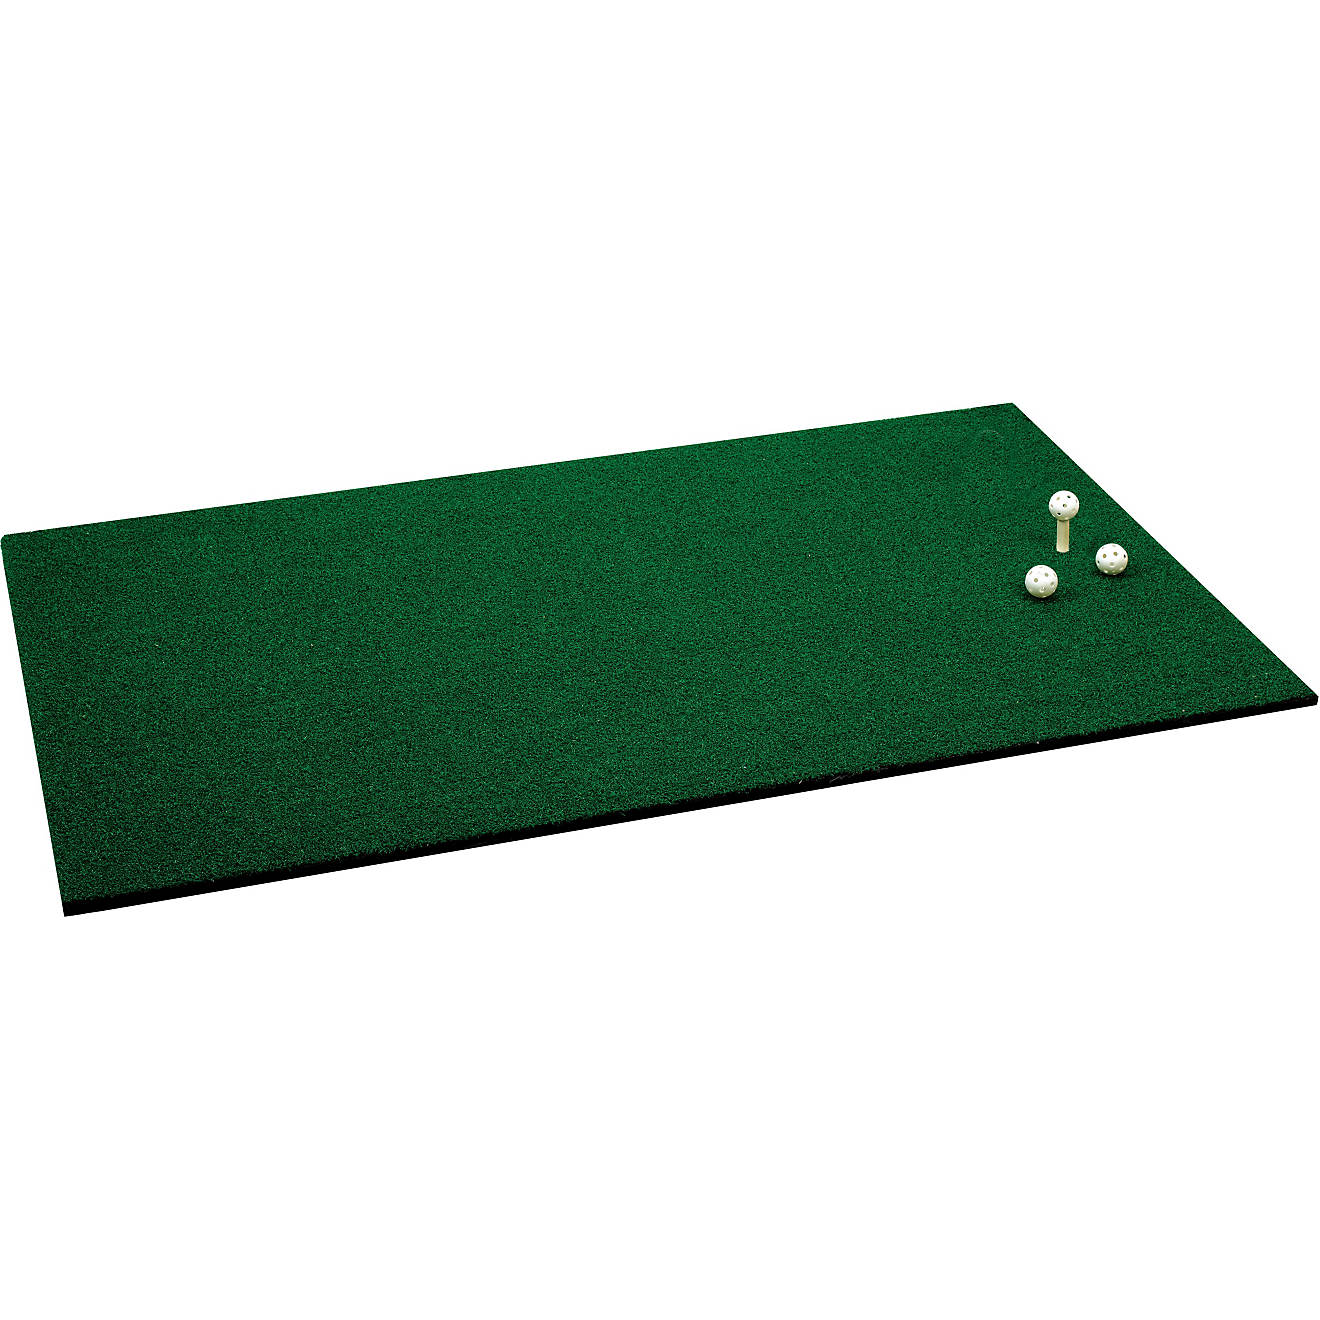 Tour Motion Extra-Large 3 ft x 5 ft Golf Turf Practice Mat                                                                       - view number 1